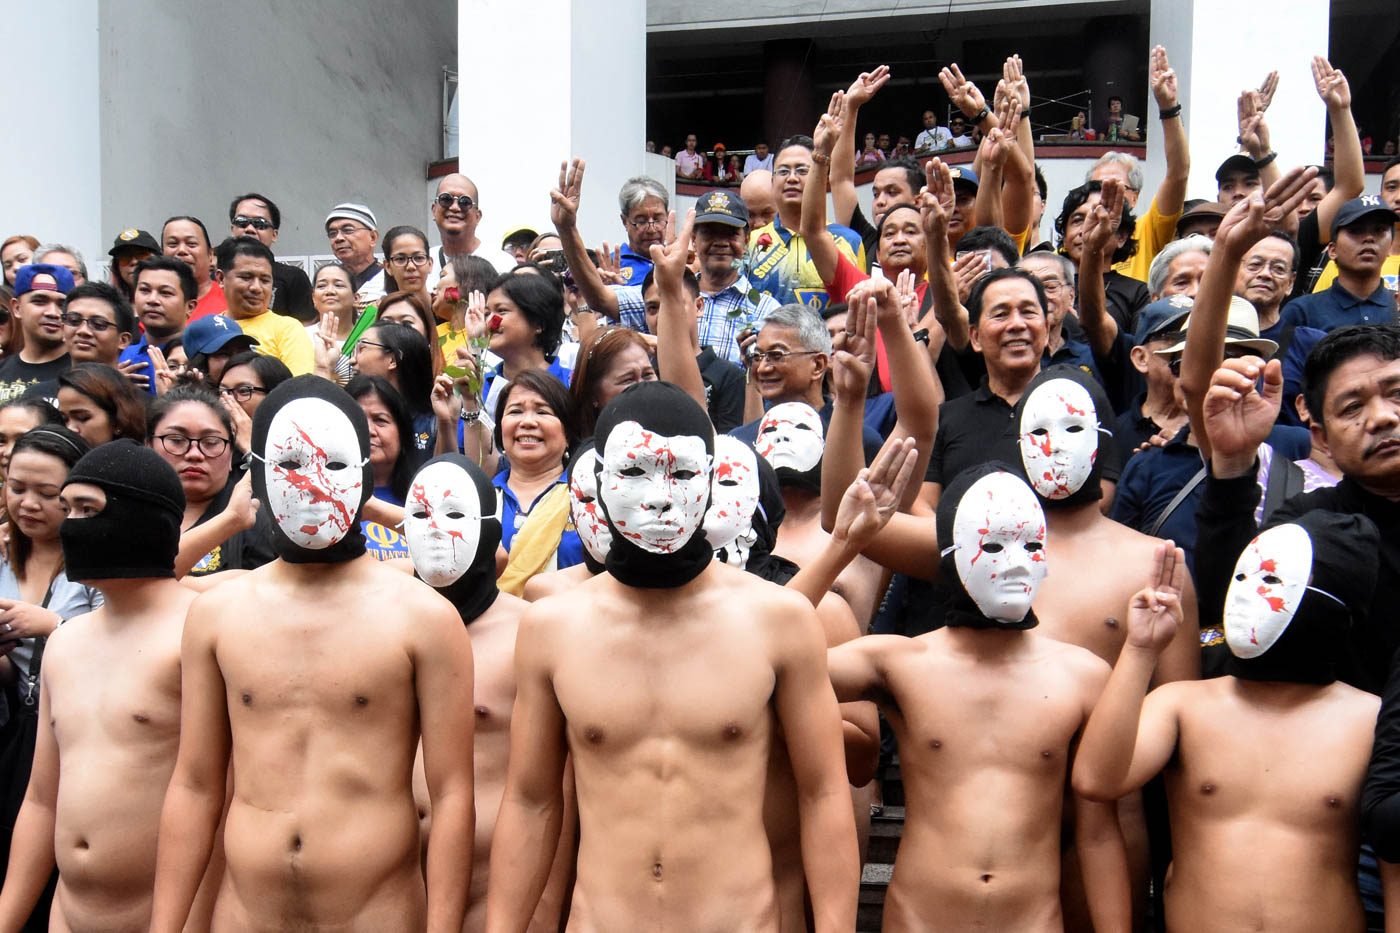 Look Oblation Run Calls To End Wars Not Lives